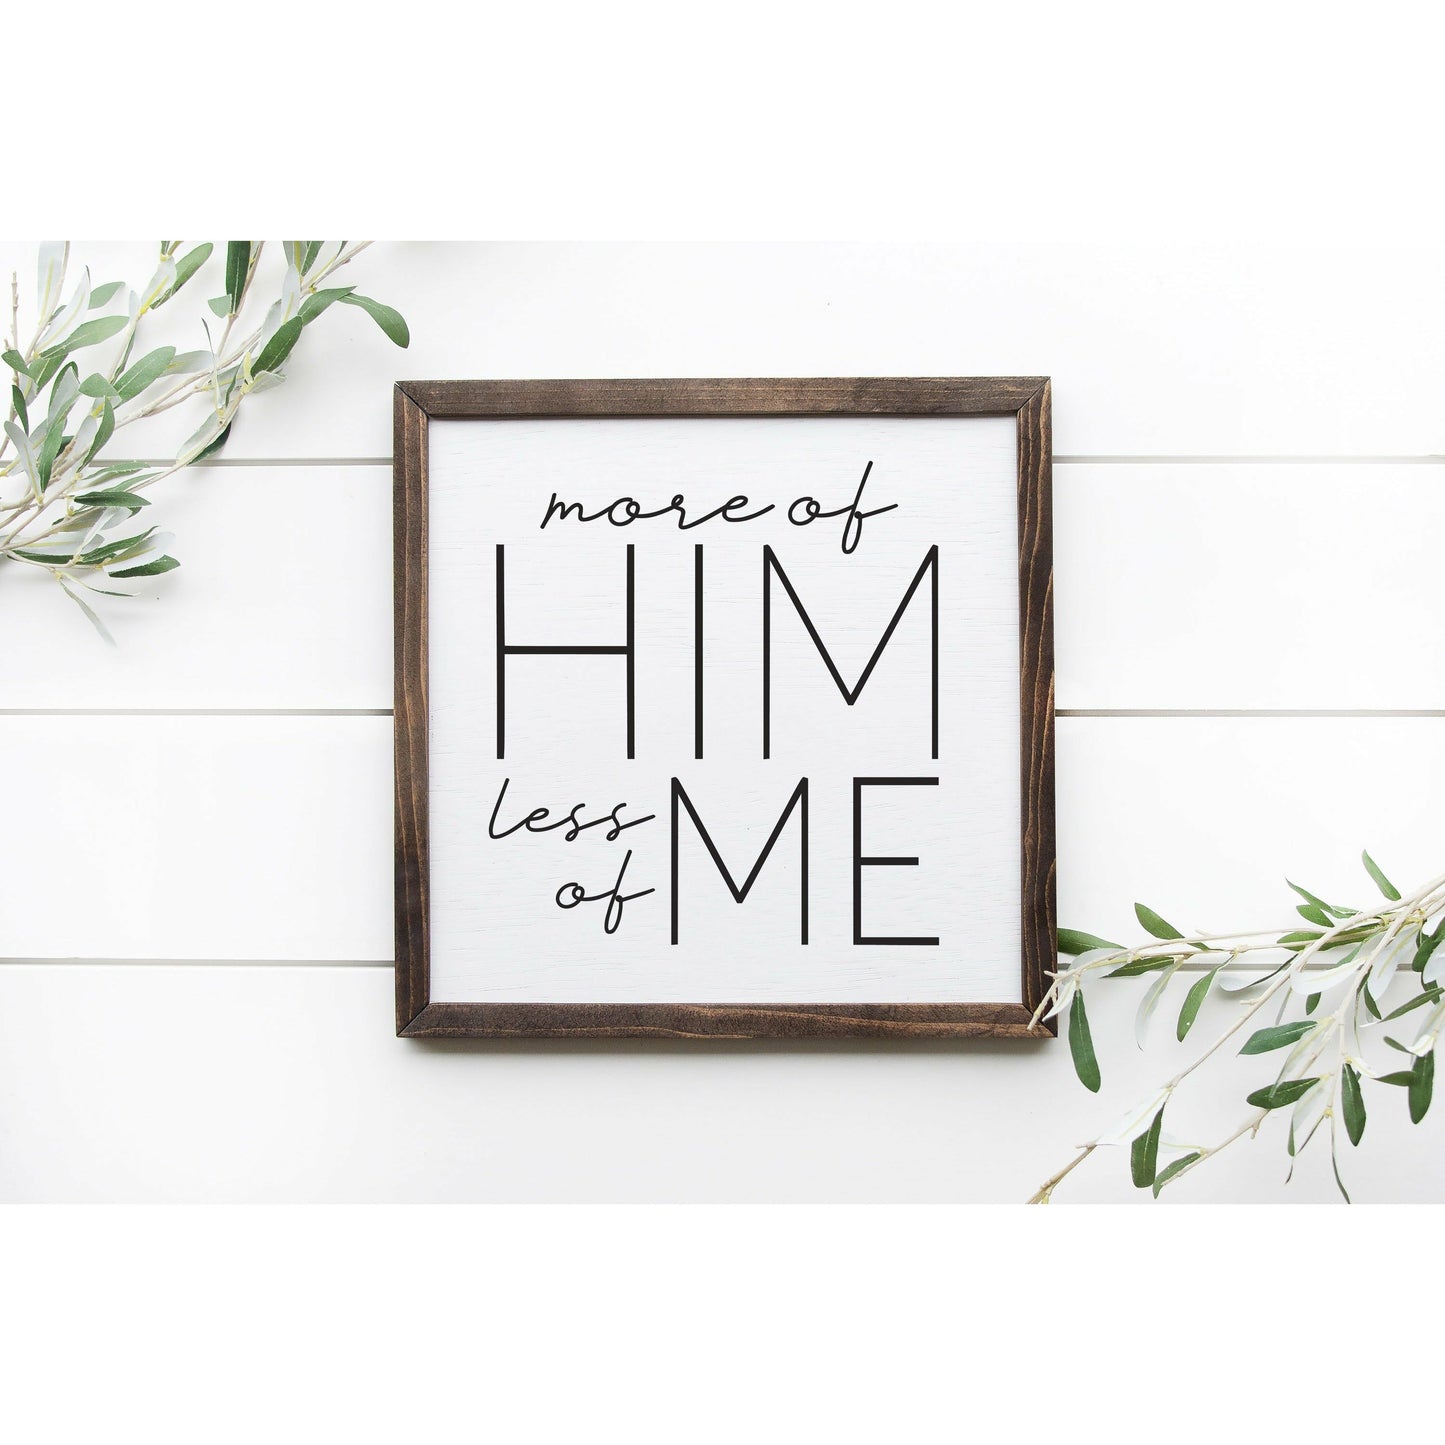 More of Him, Less of Me - Rustic Wooden Wall Art Sign